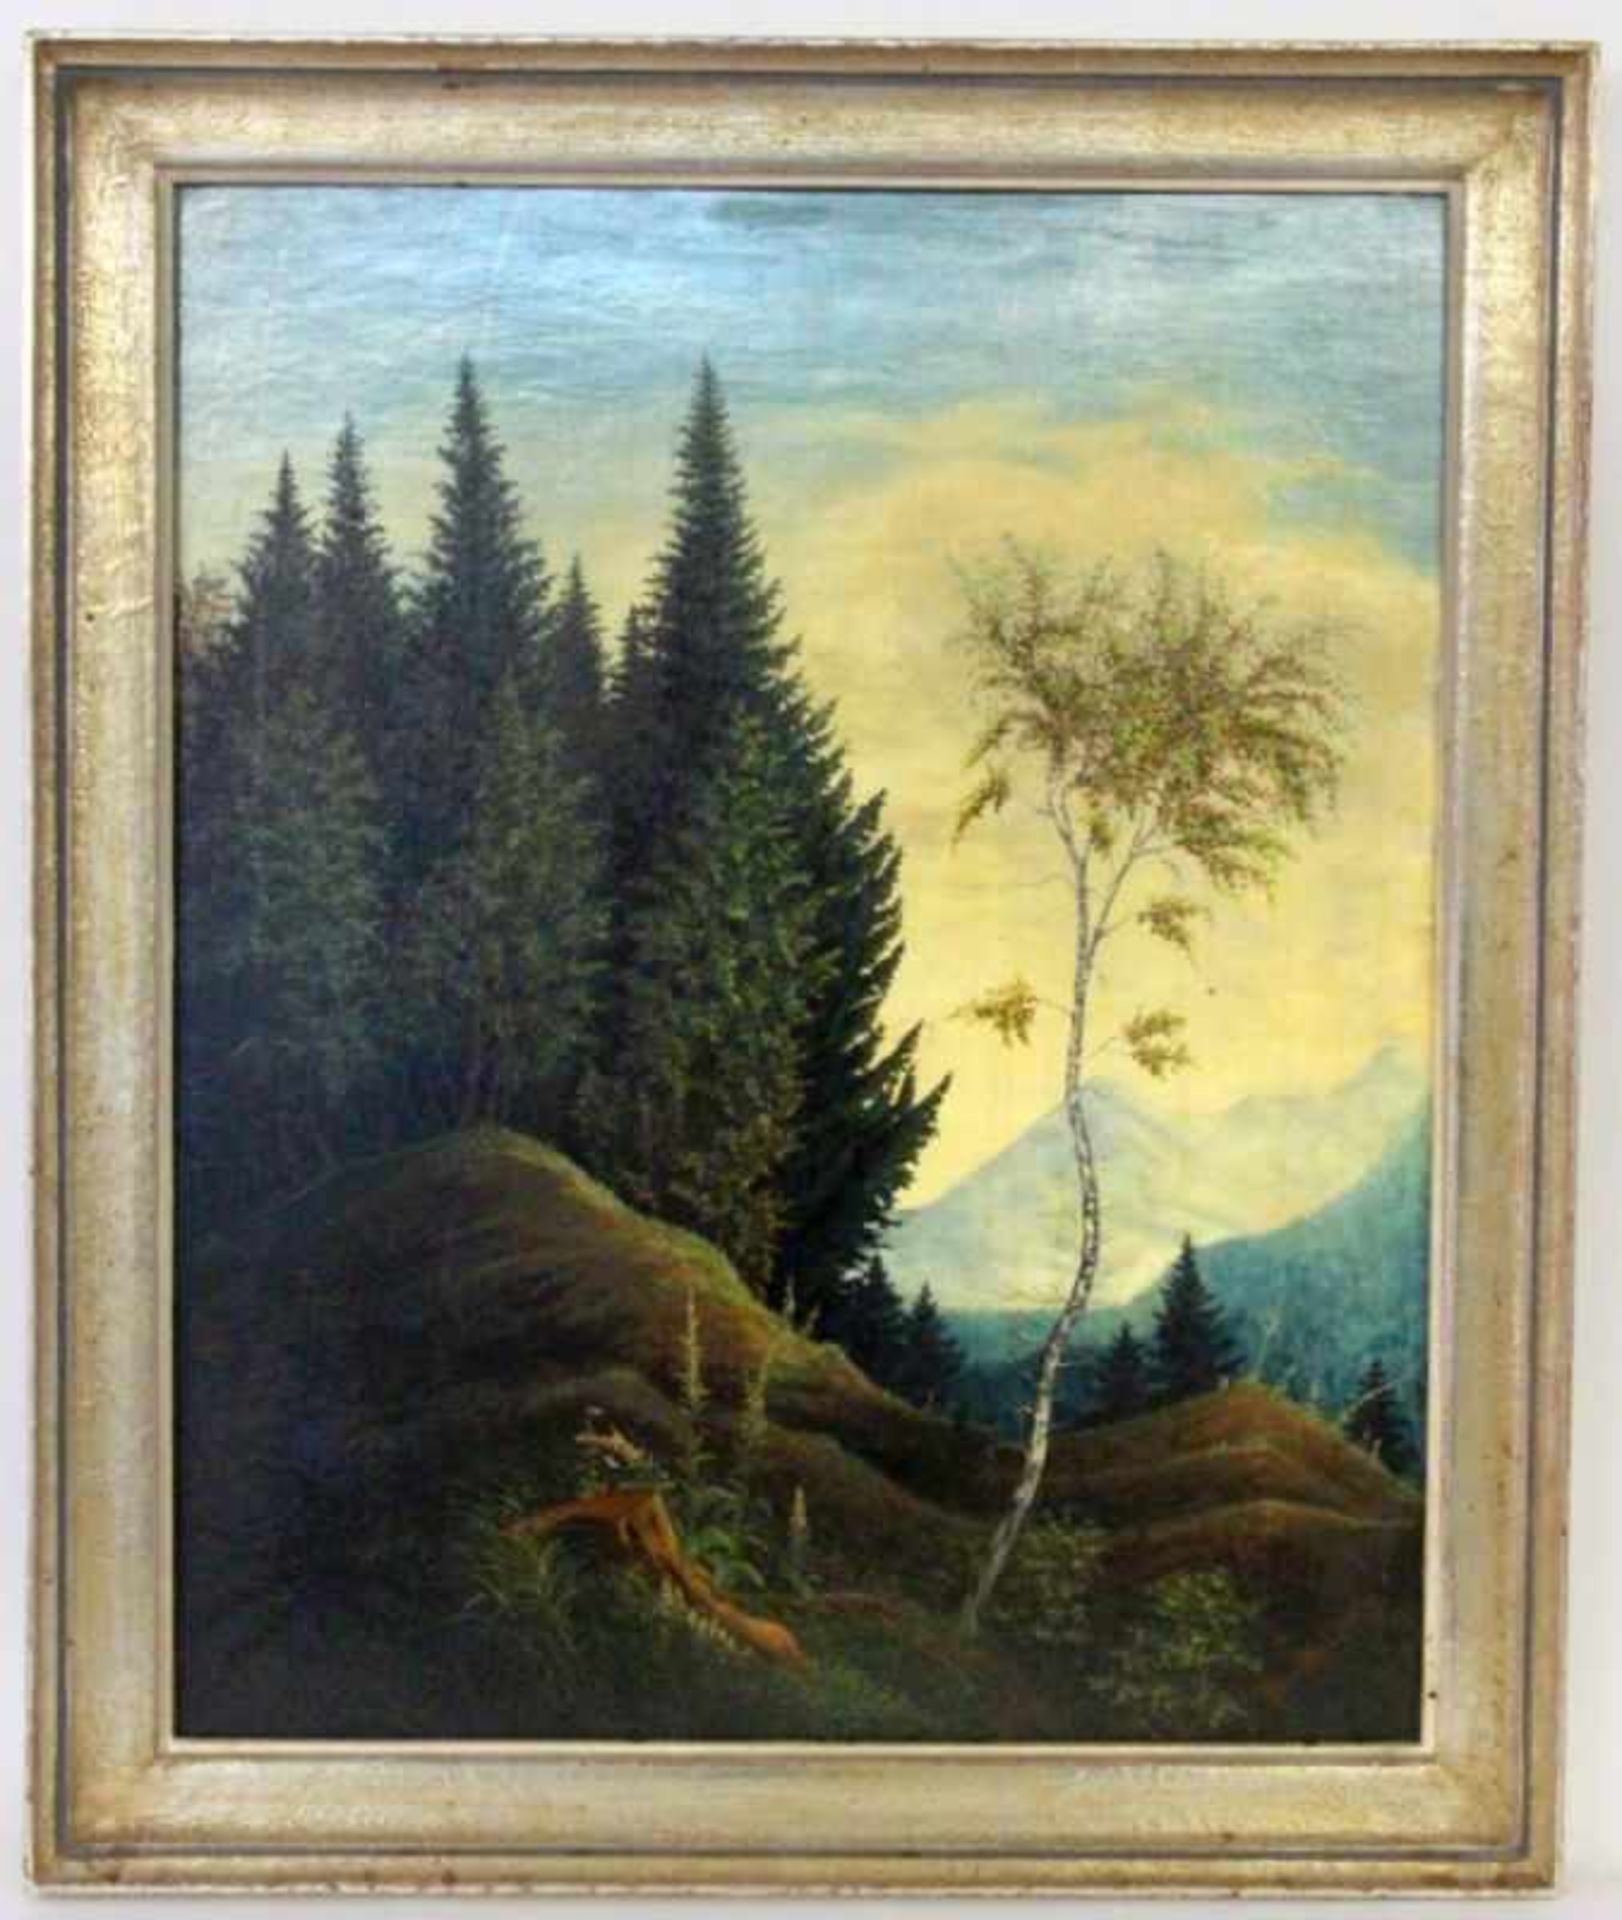 CUBERLI, PETER OTTO 20th century Black Forest Landscape. Oil on panel, signed. 79 x 72 cm,